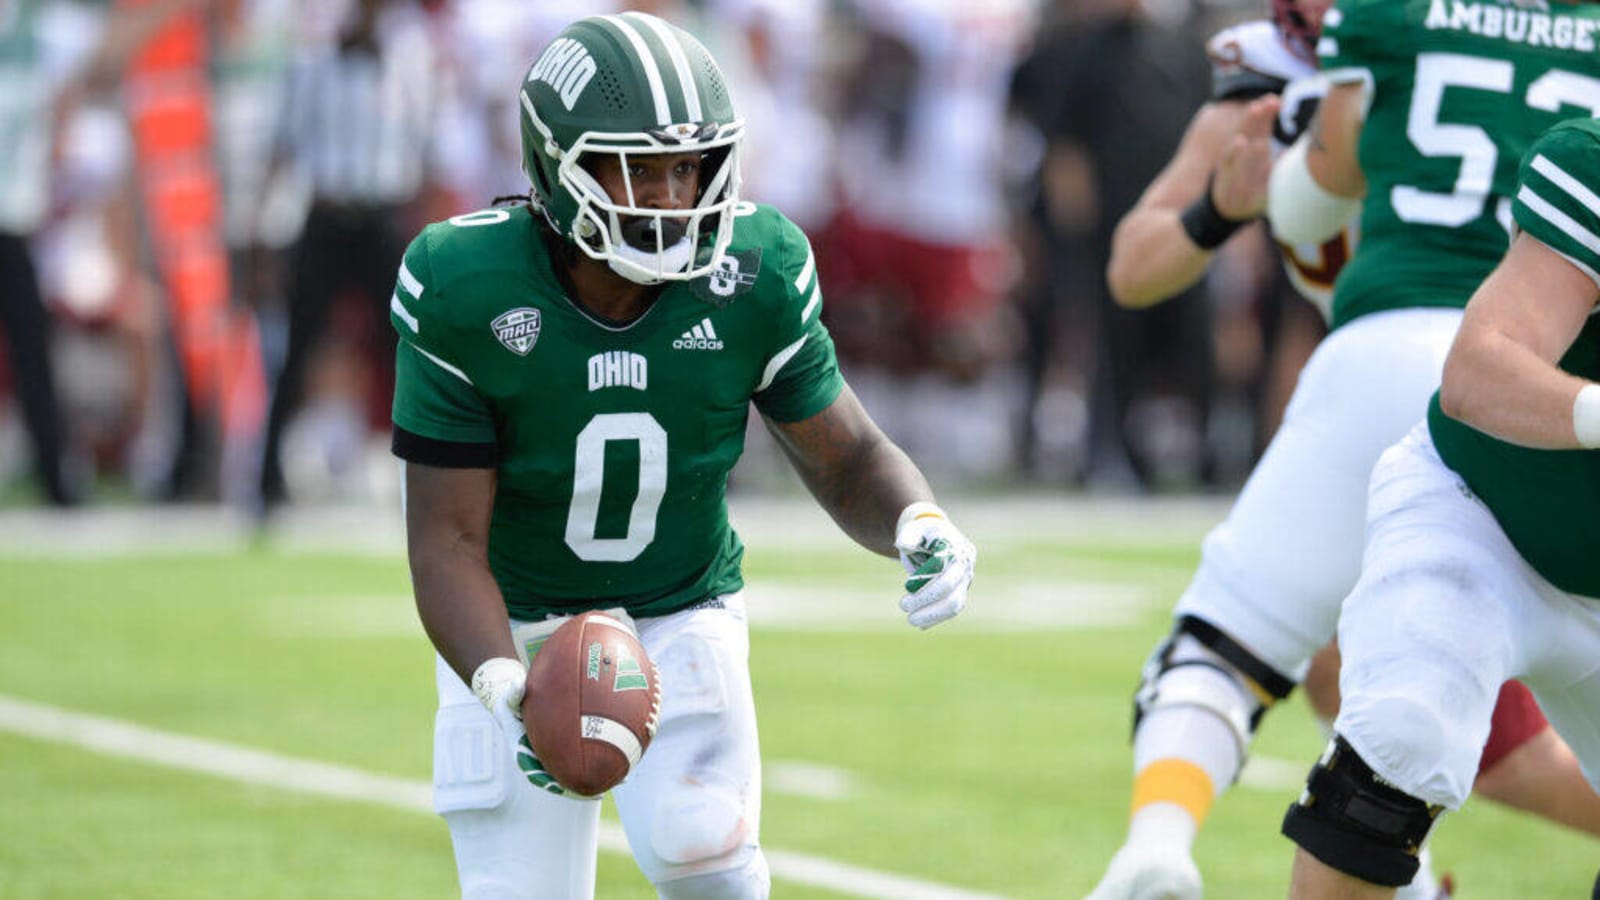 How to watch Ohio vs Central Michigan via free live streaming today: College Football start time, preview, and TV channel